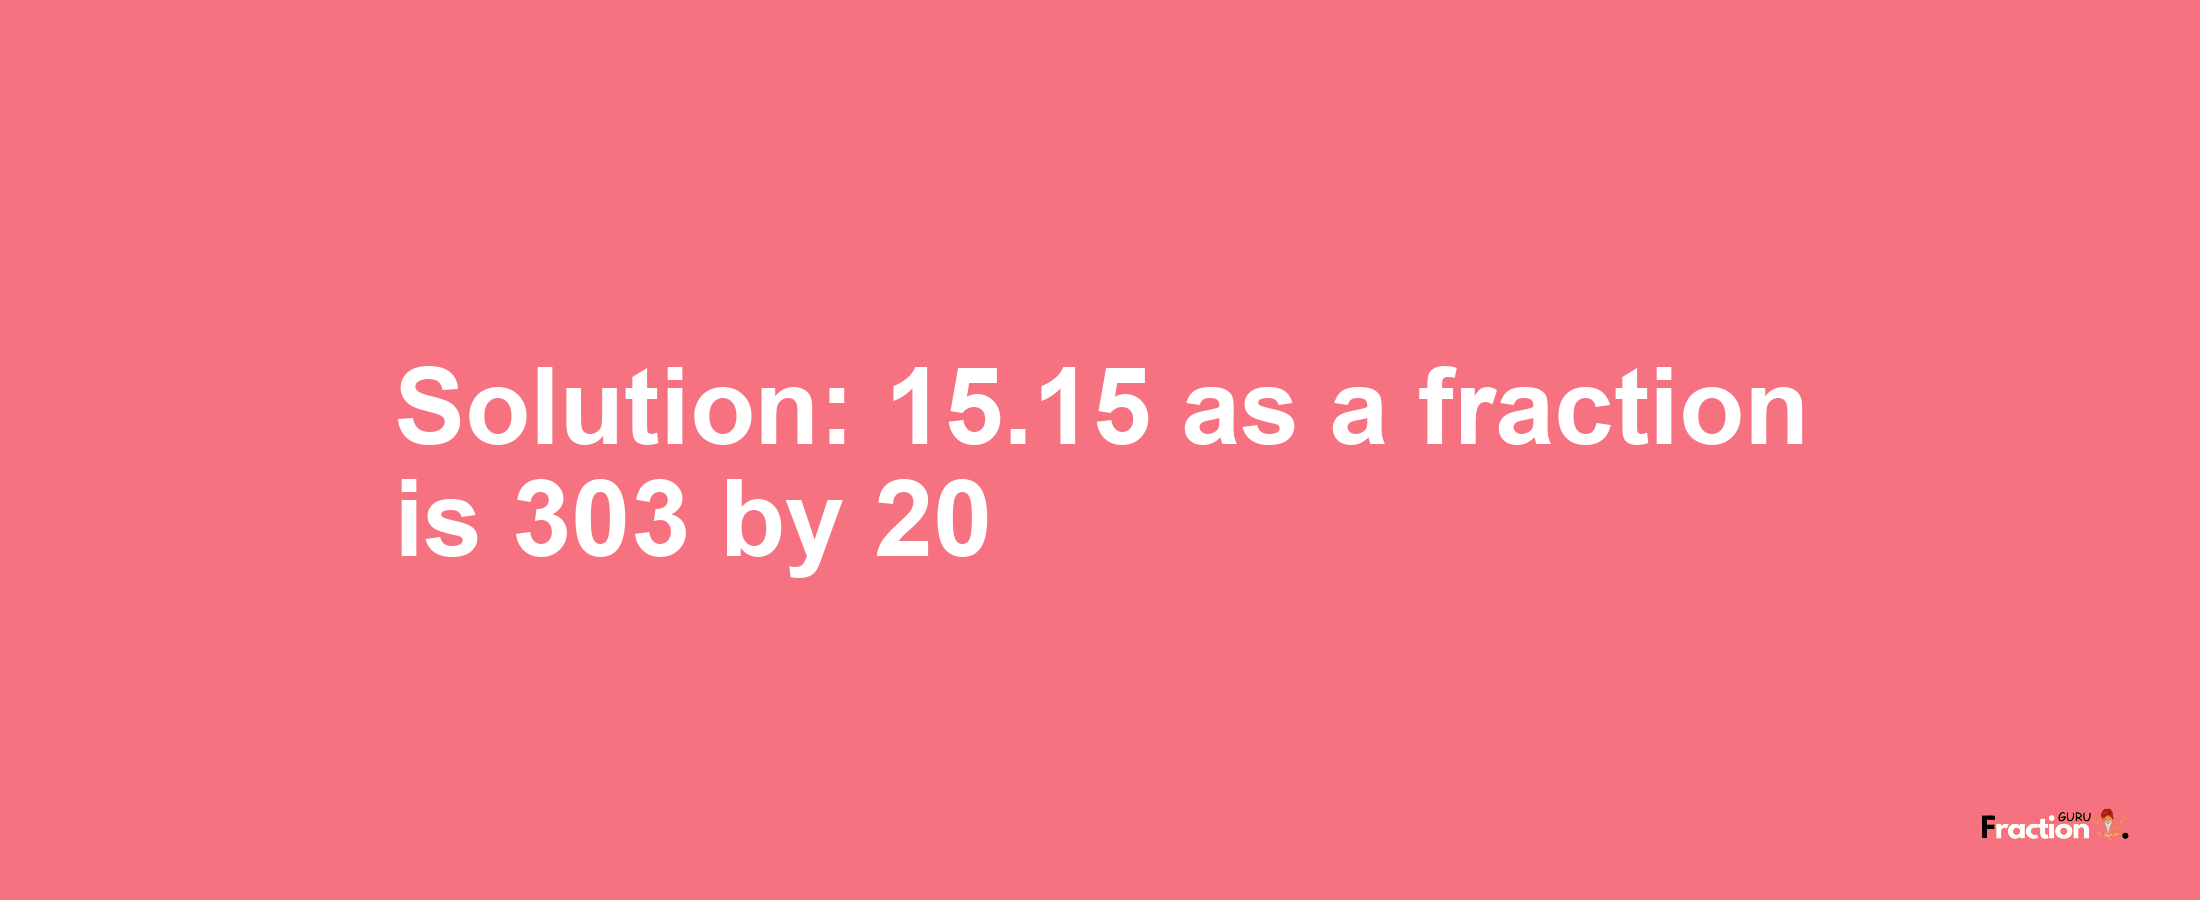 Solution:15.15 as a fraction is 303/20